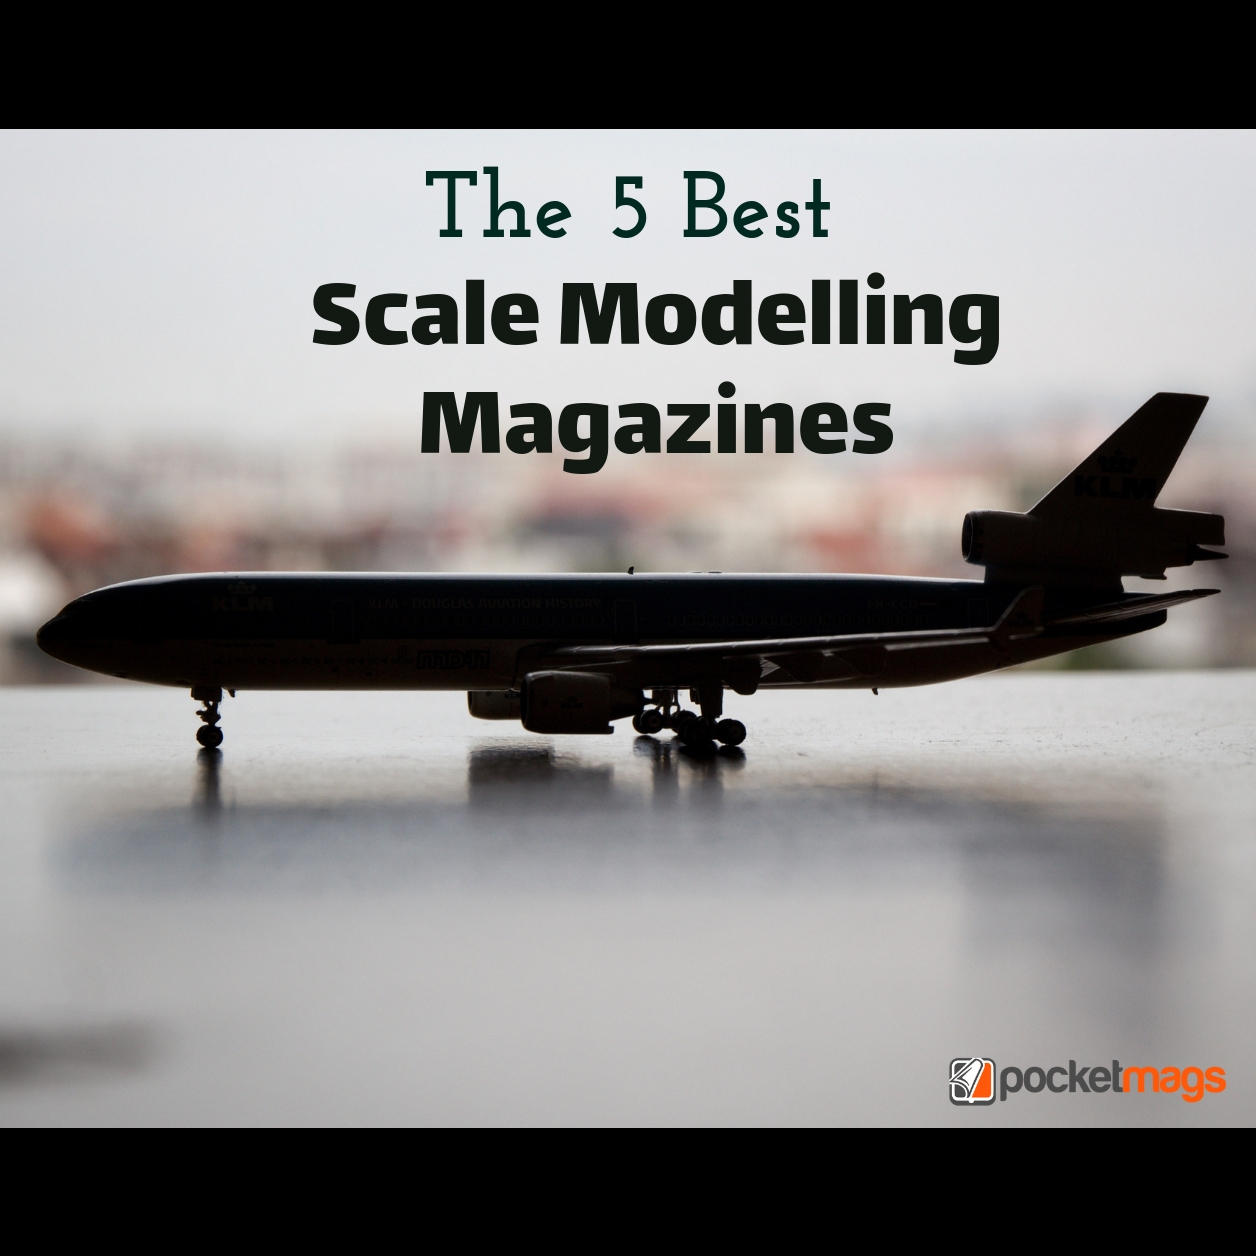 The 5 Best Scale Modelling Magazines